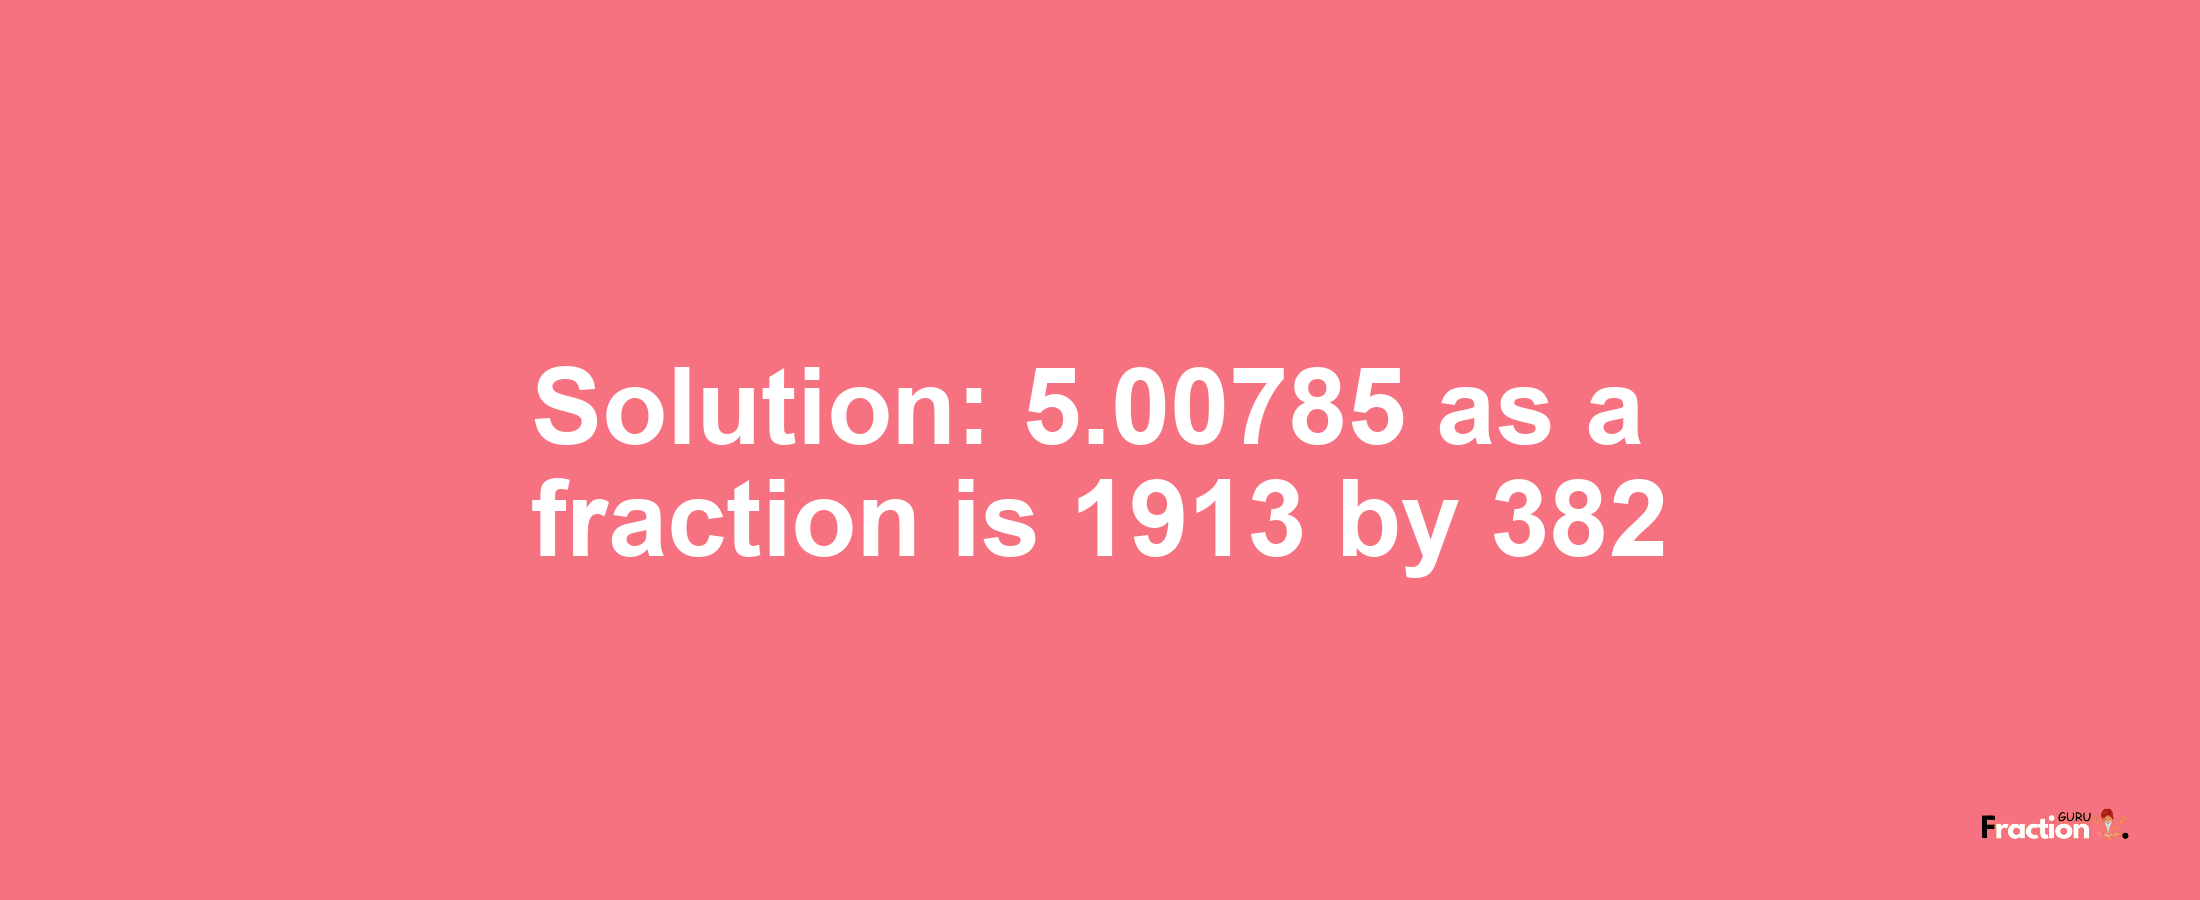 Solution:5.00785 as a fraction is 1913/382